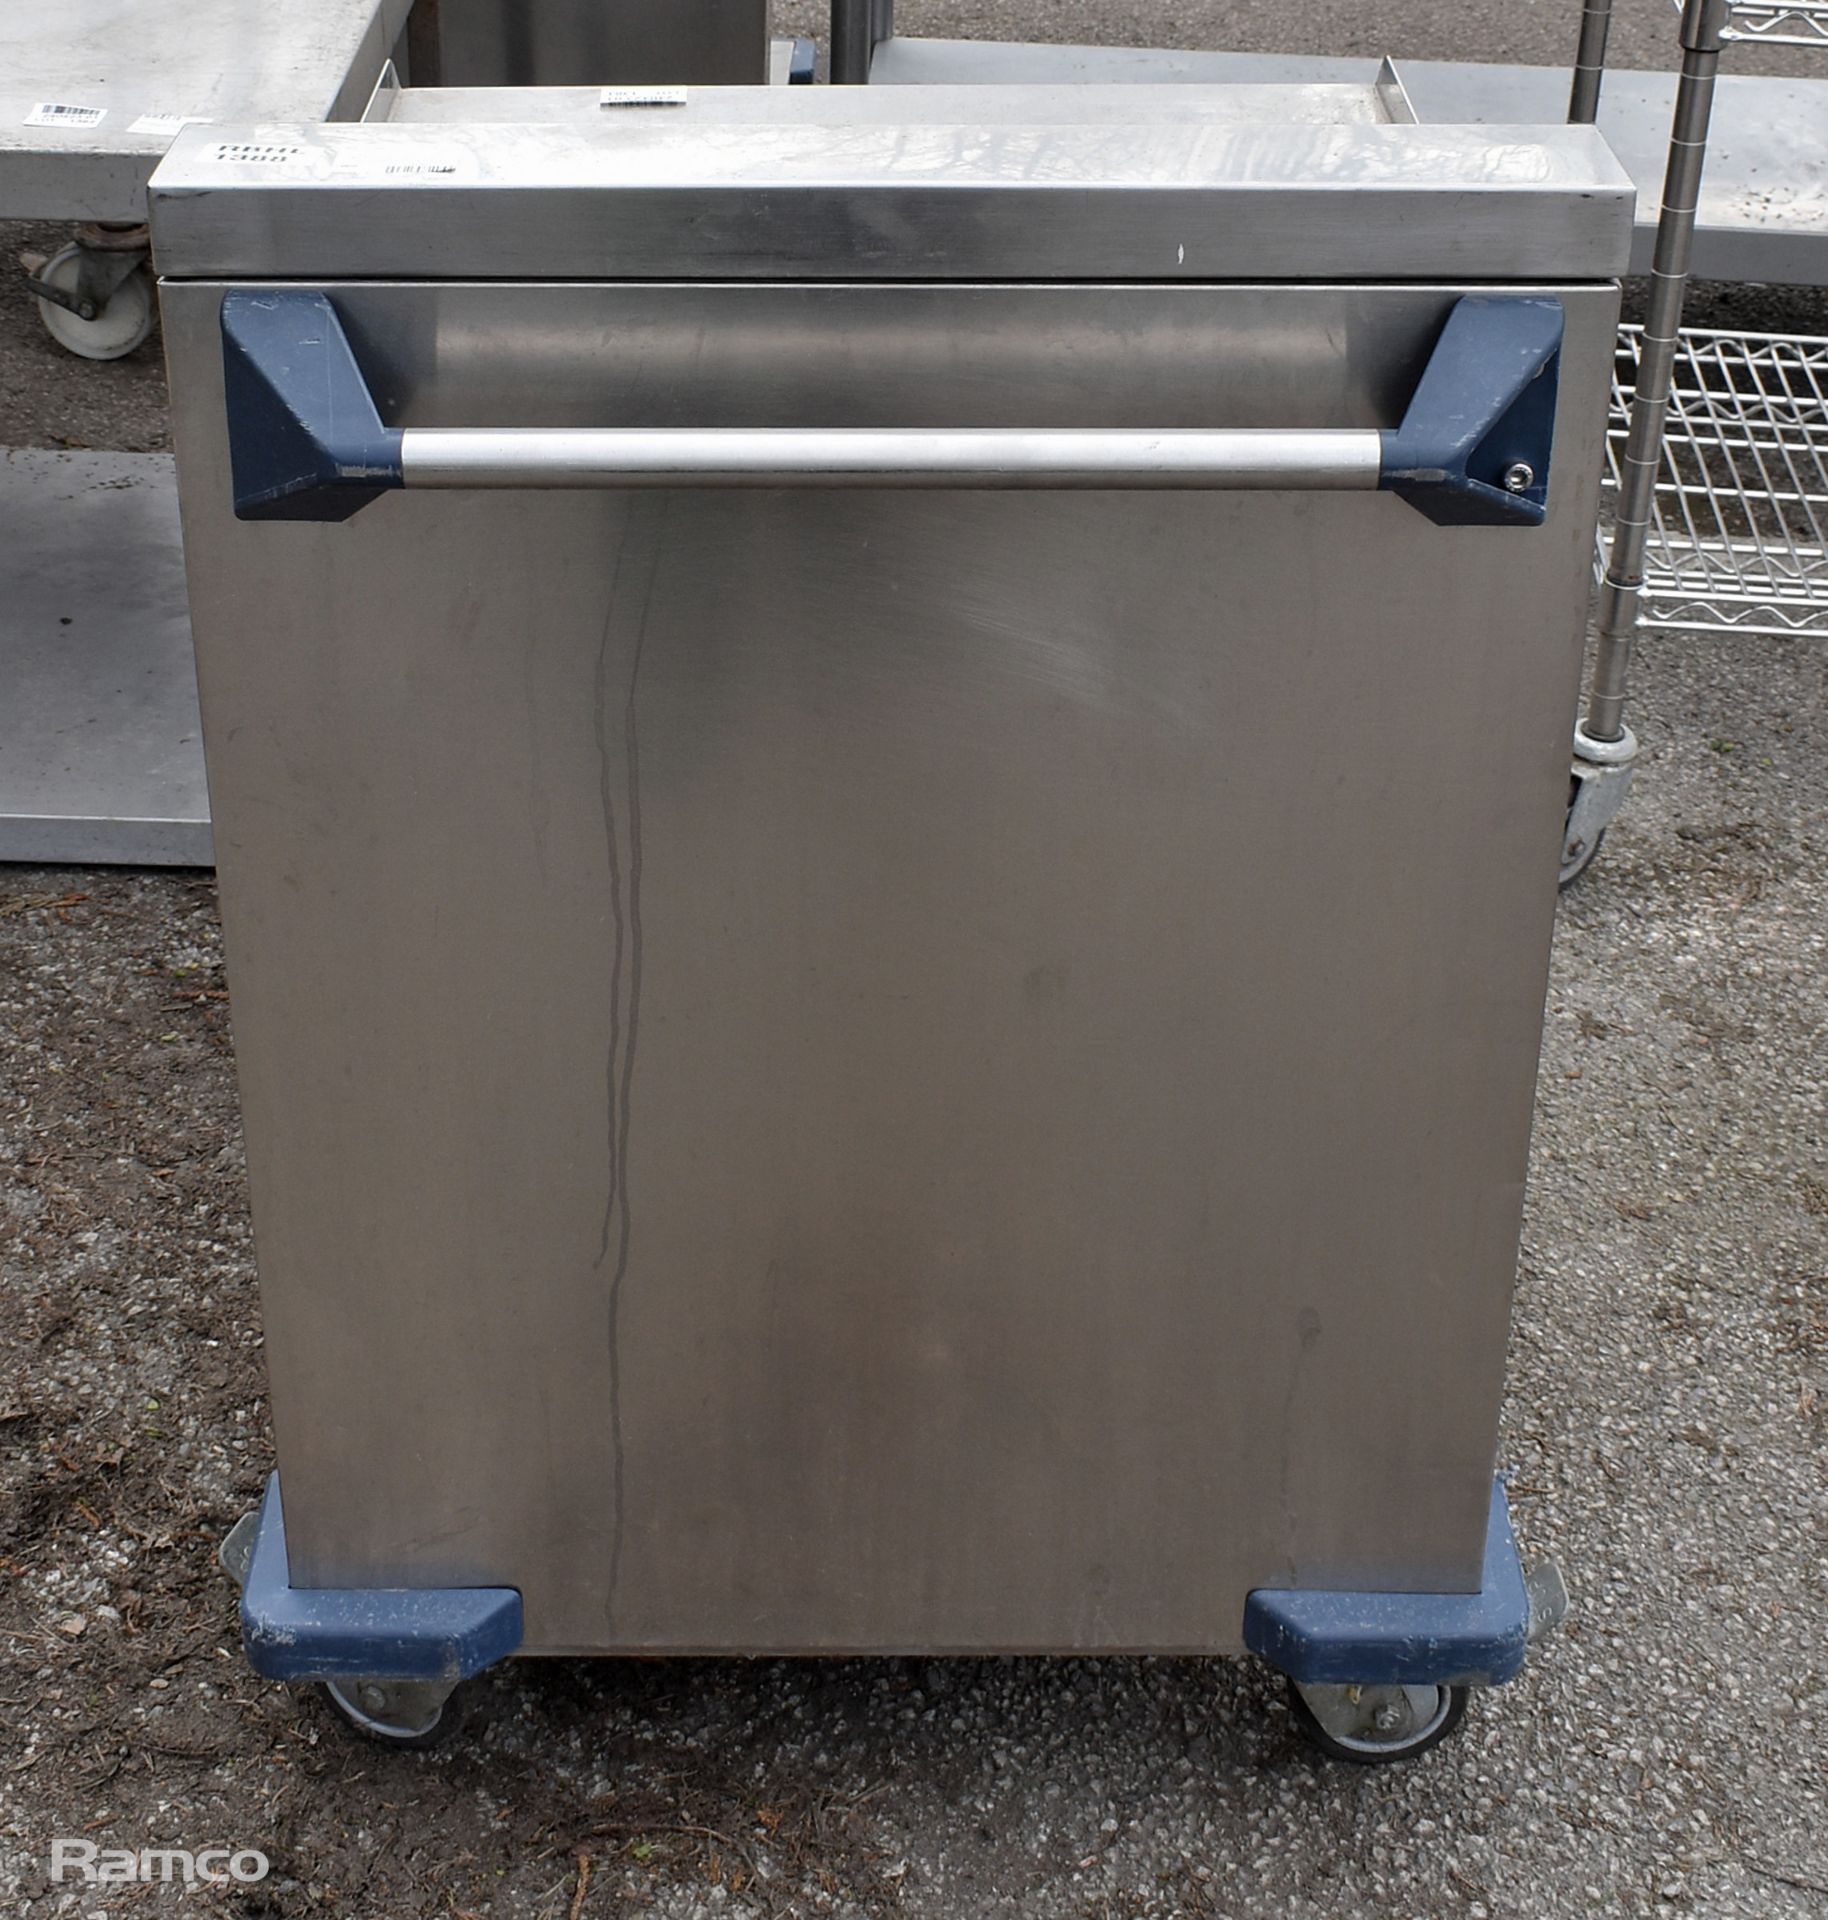 Burlodge stainless steel adjustable self-levelling tray trolley - W 650 x D 770 x H 935mm - Image 3 of 3